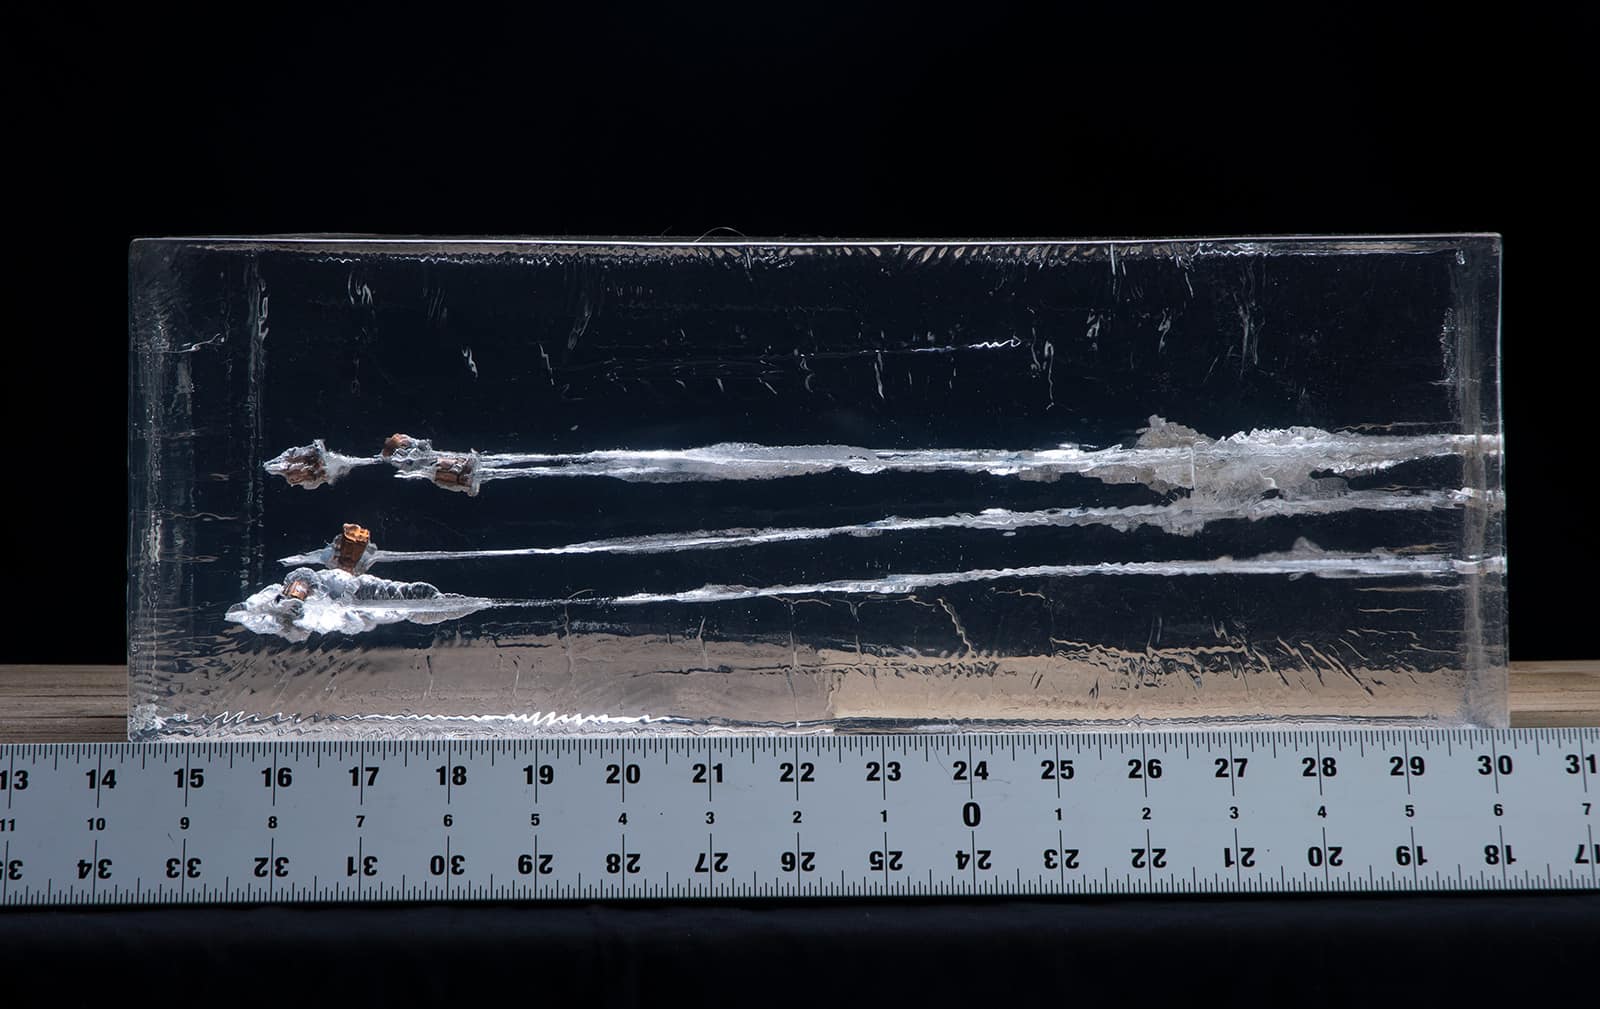 38 special gel testing results with fired bullets into gelatin